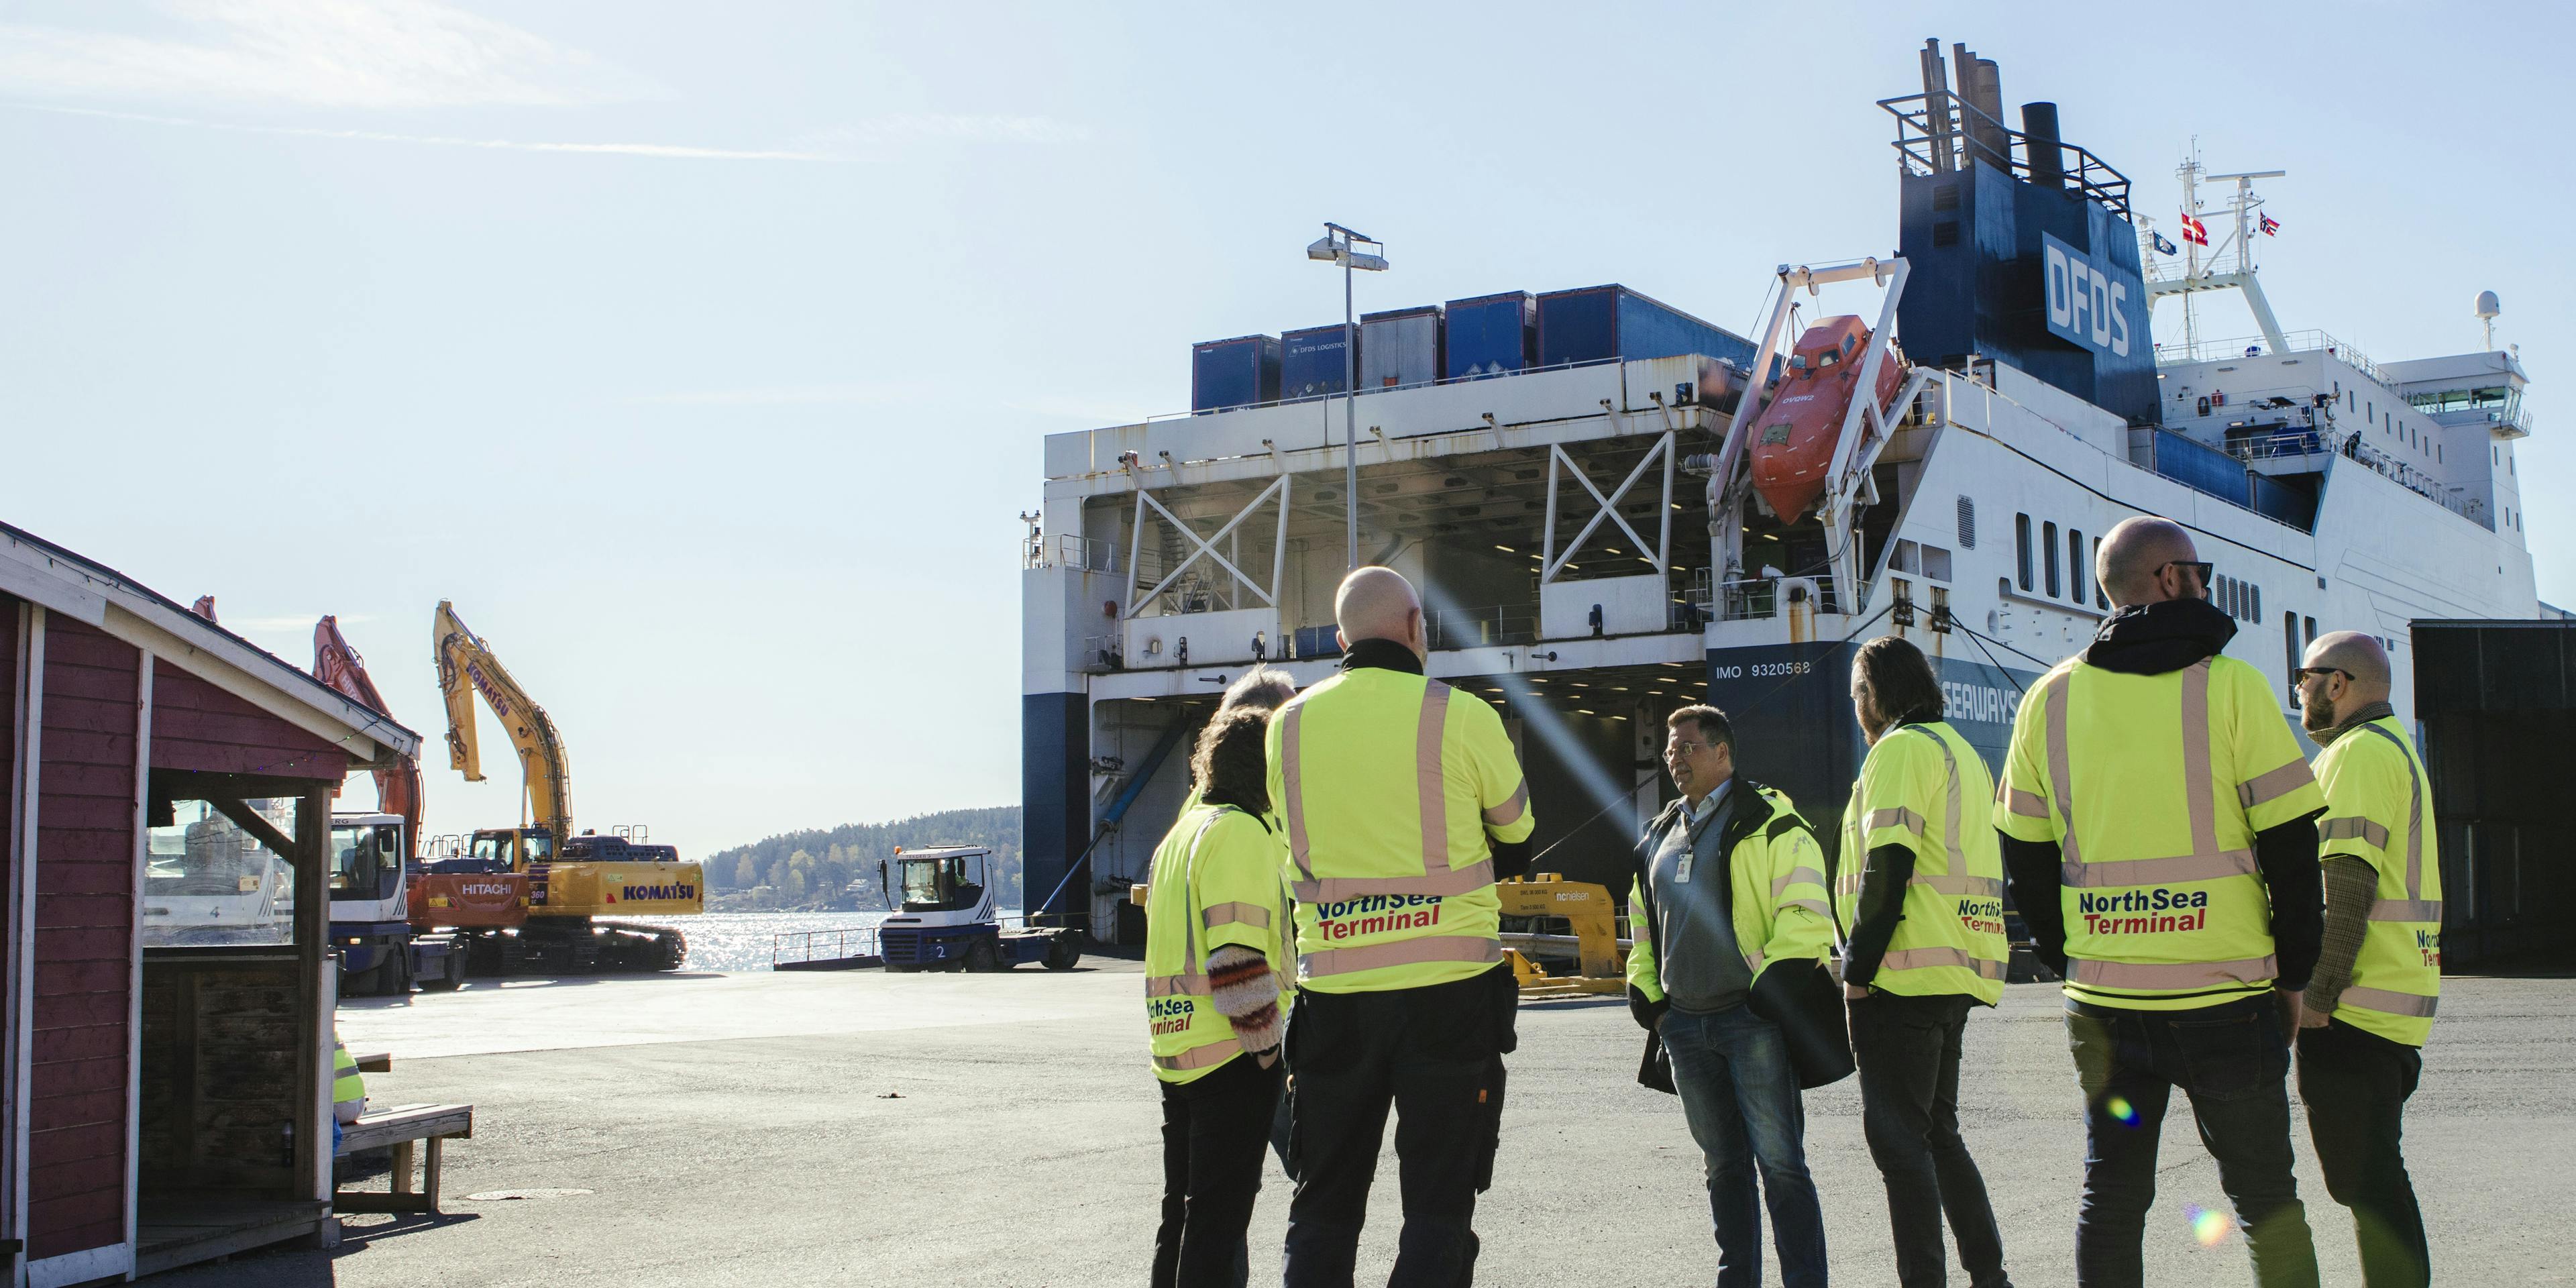 DFDS NorthSea terminal employees, ship